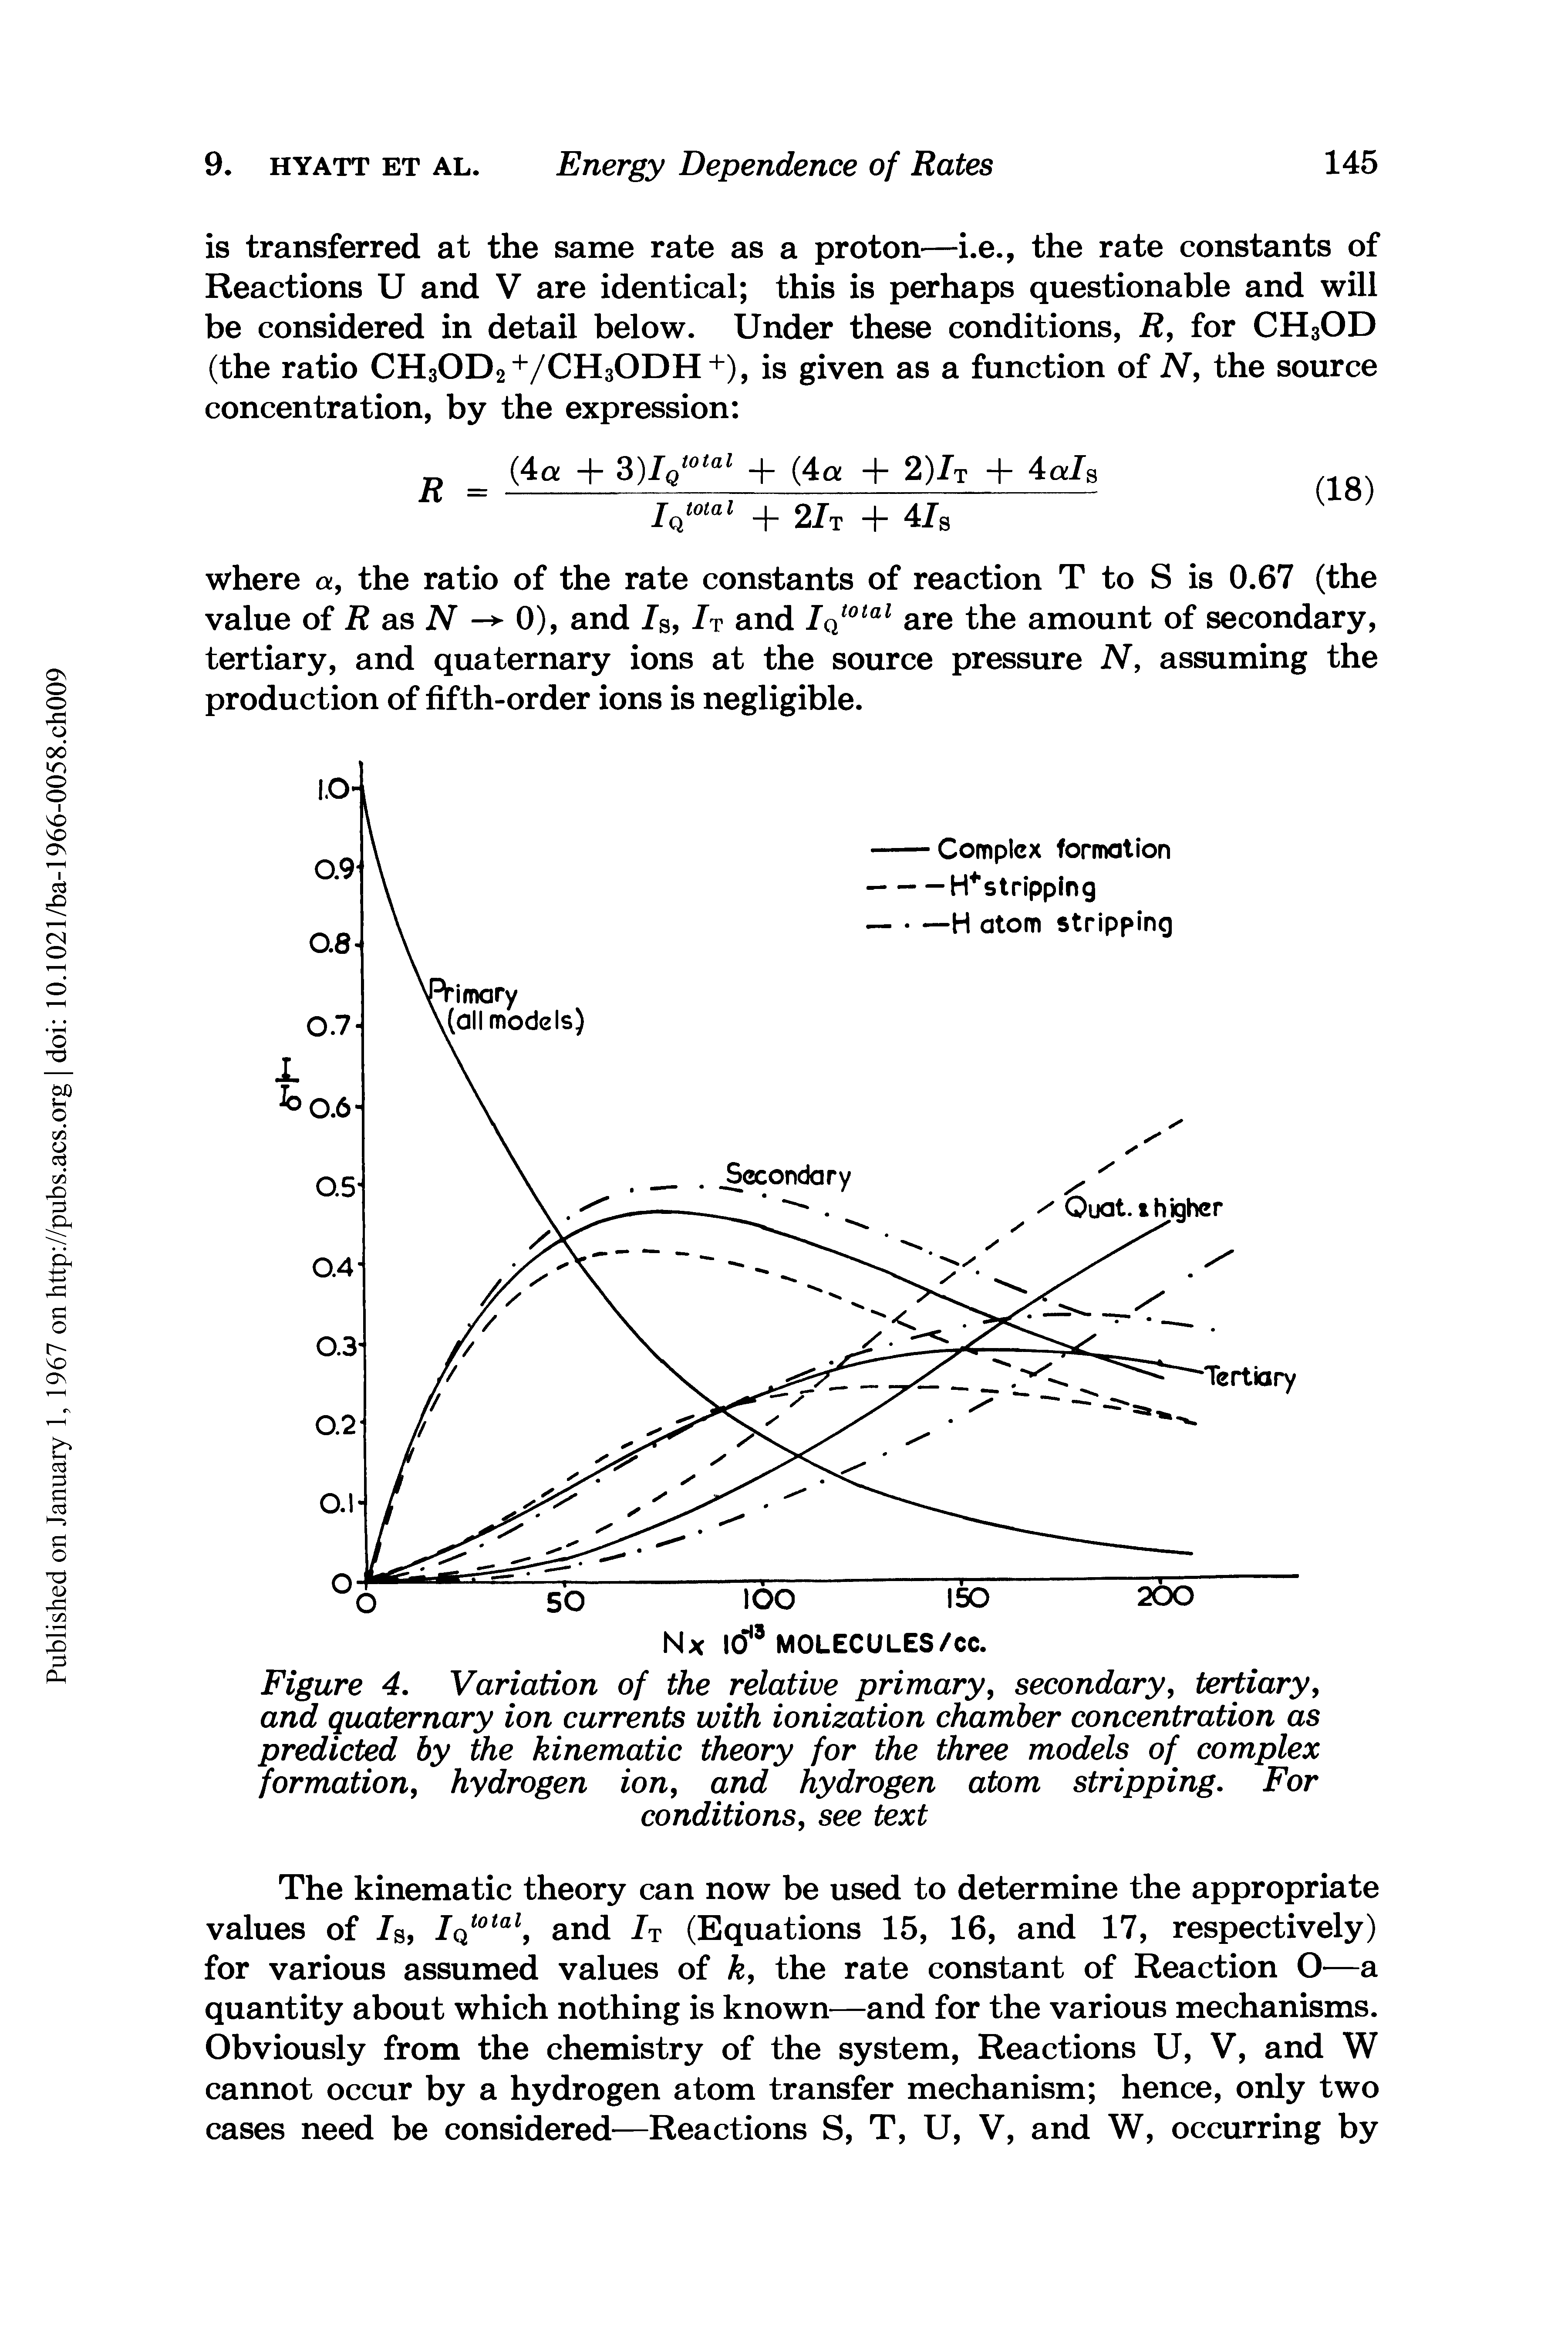 Figure 4. Variation of the relative primary, secondary, tertiary, and quaternary ion currents with ionization chamber concentration as predicted by the kinematic theory for the three models of complex formation, hydrogen ion, and hydrogen atom stripping. For conditions, see text...